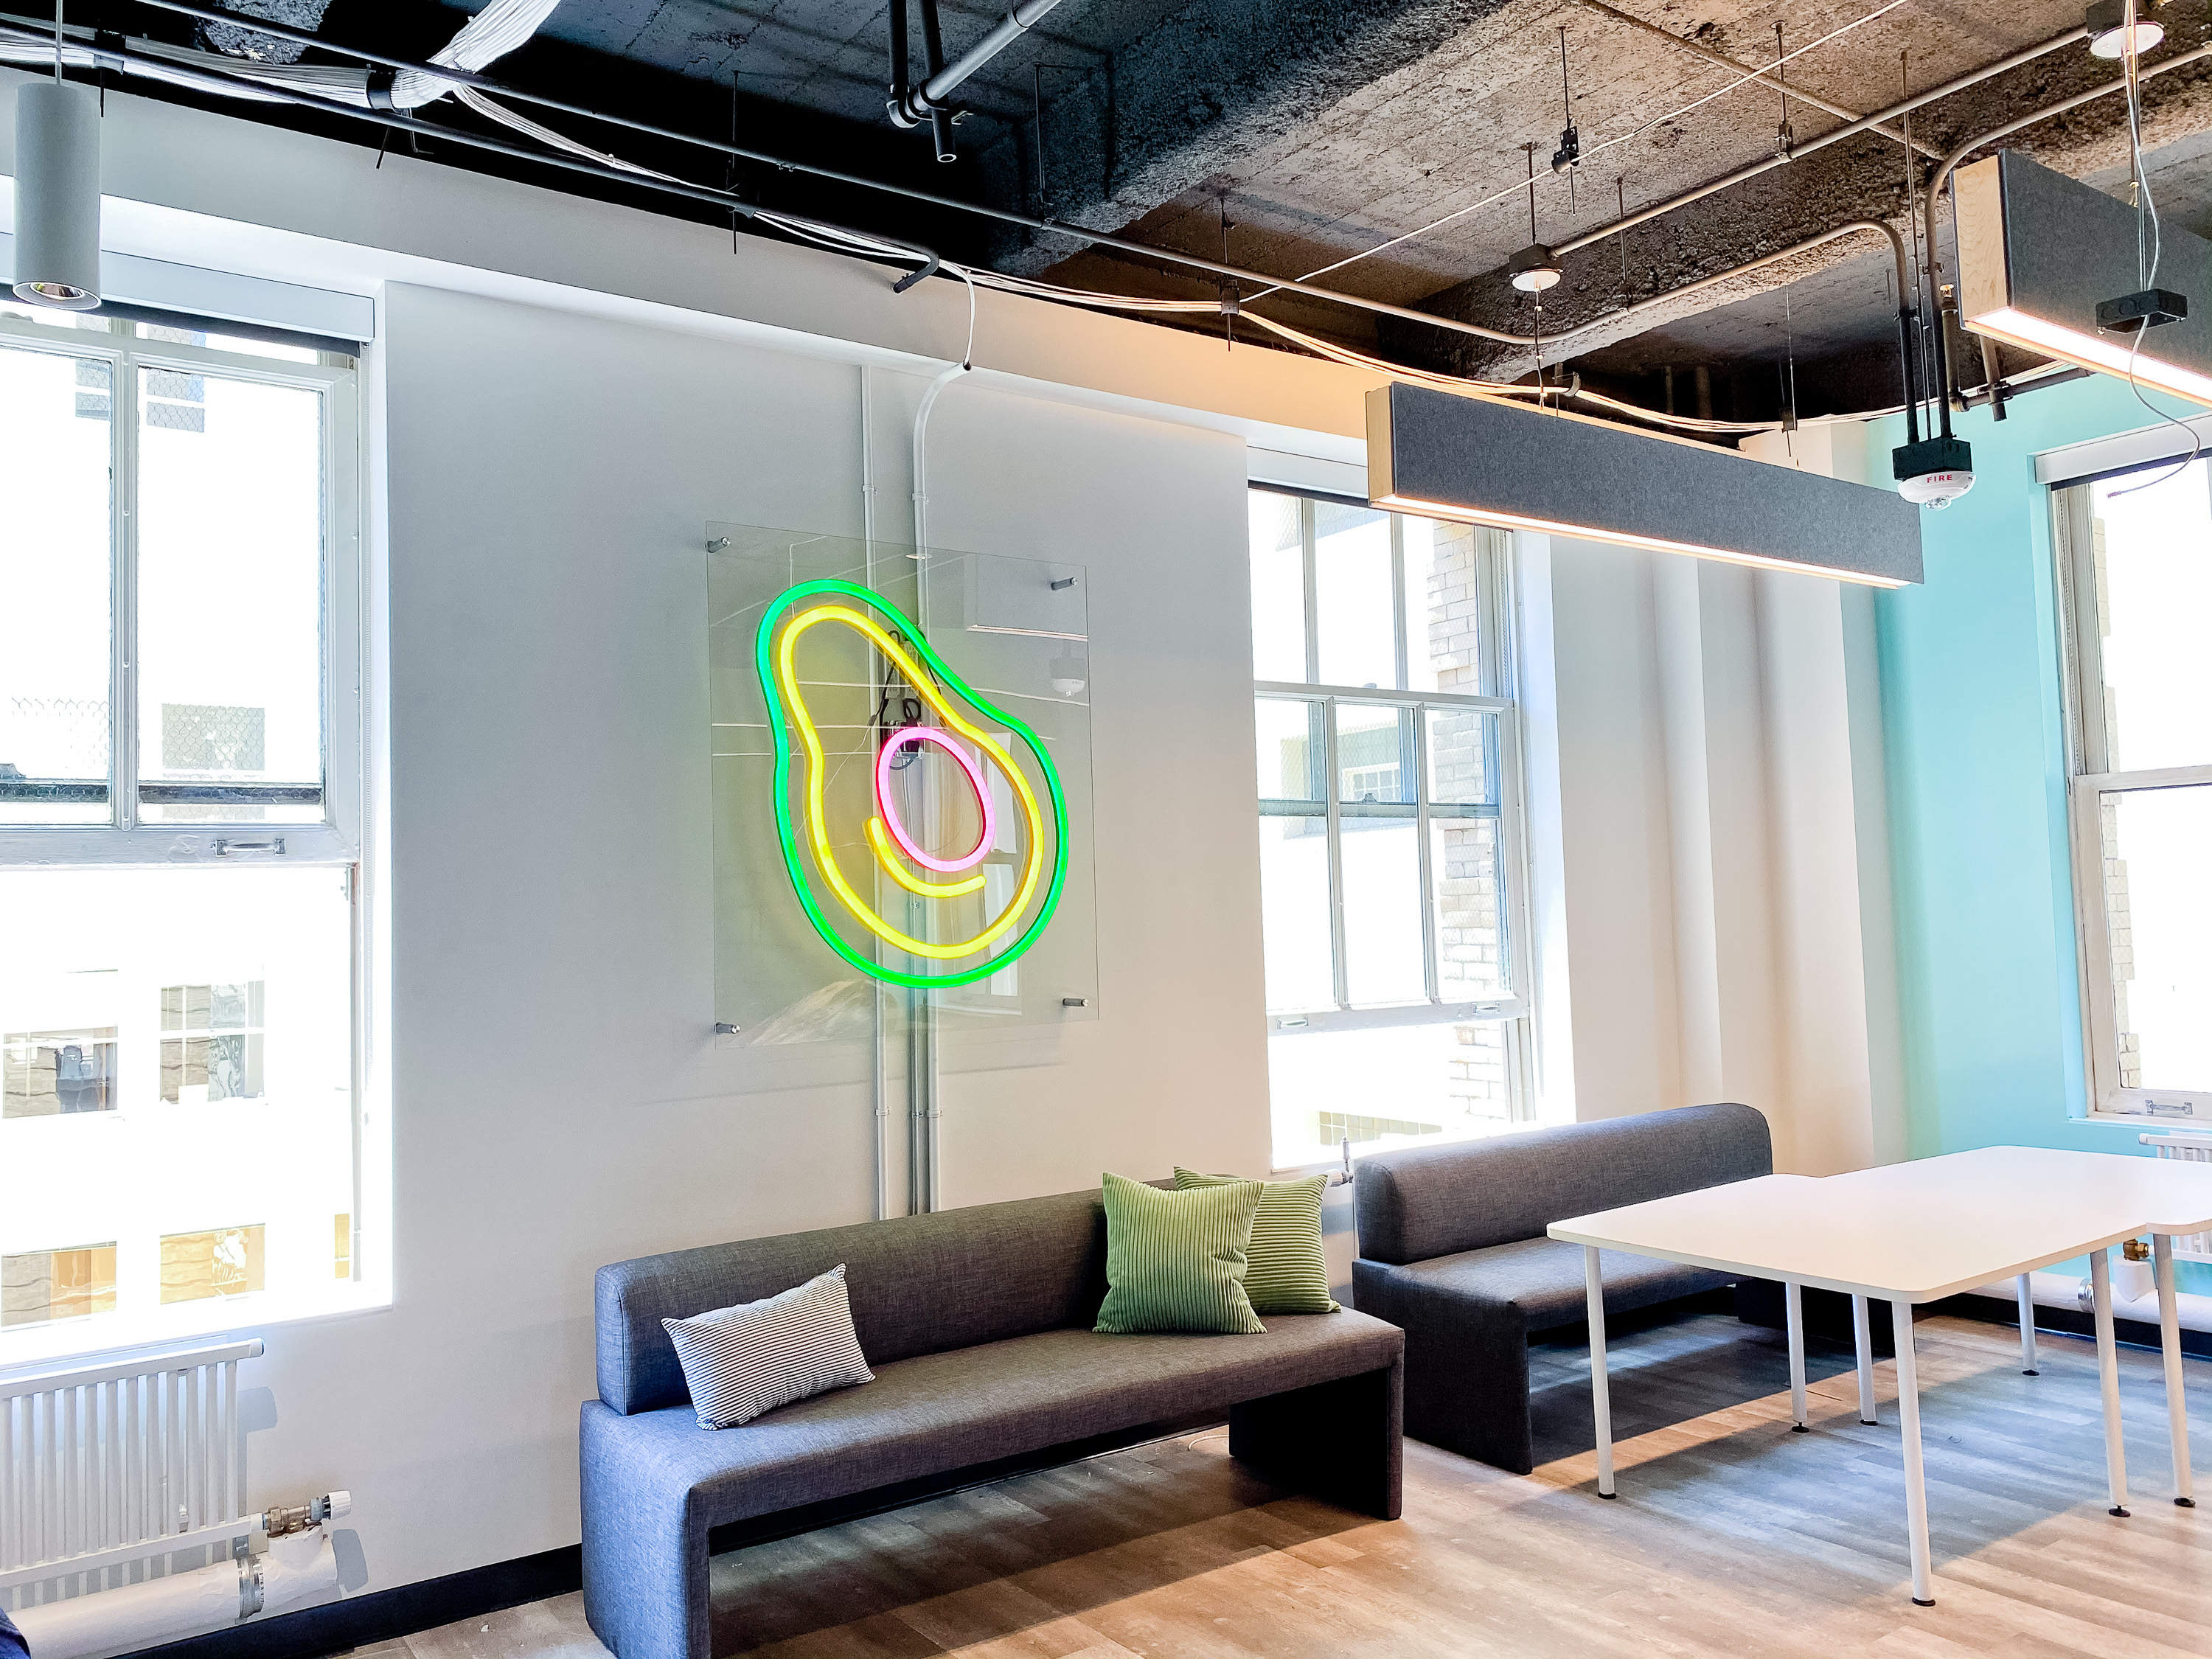 Neon avocado sign with clear acrylic backer on white wall for the San Francisco office of Meltwater, a software as a service company that develops and markets media monitoring and business intelligence software.